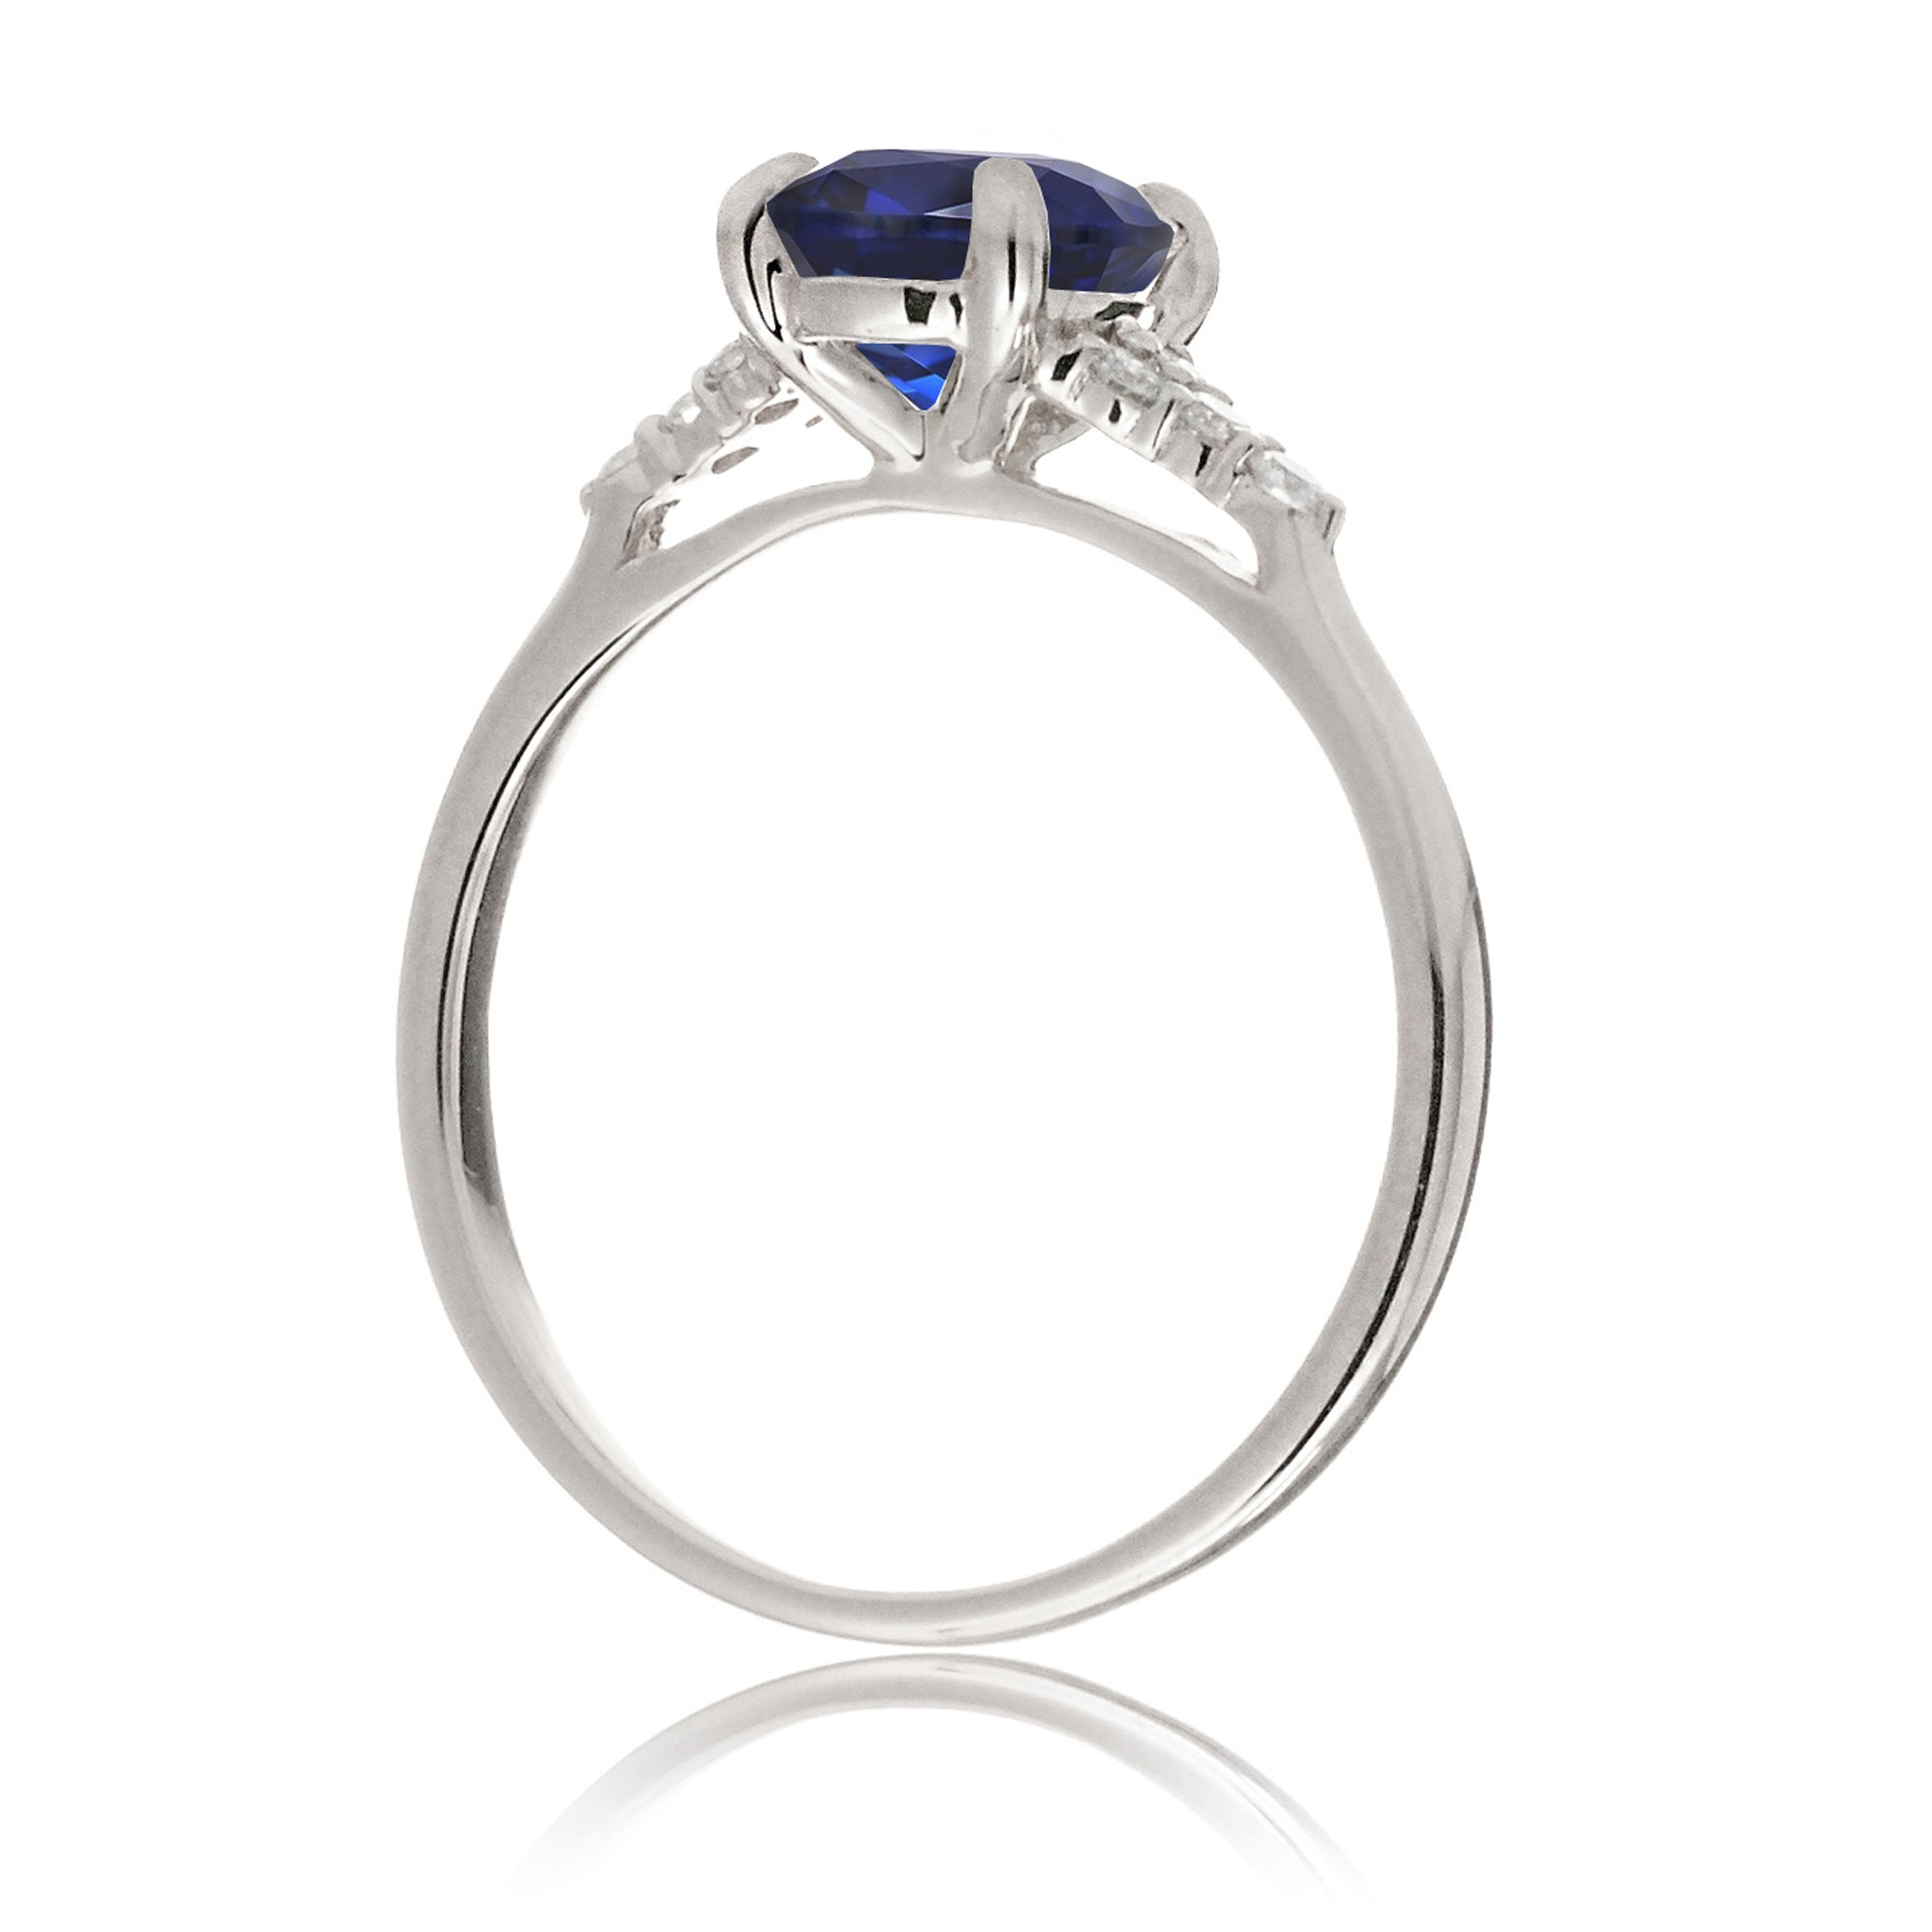 Sapphire engagement ring with a blue step emerald cut lab-grown sapphire and diamond accent in white gold